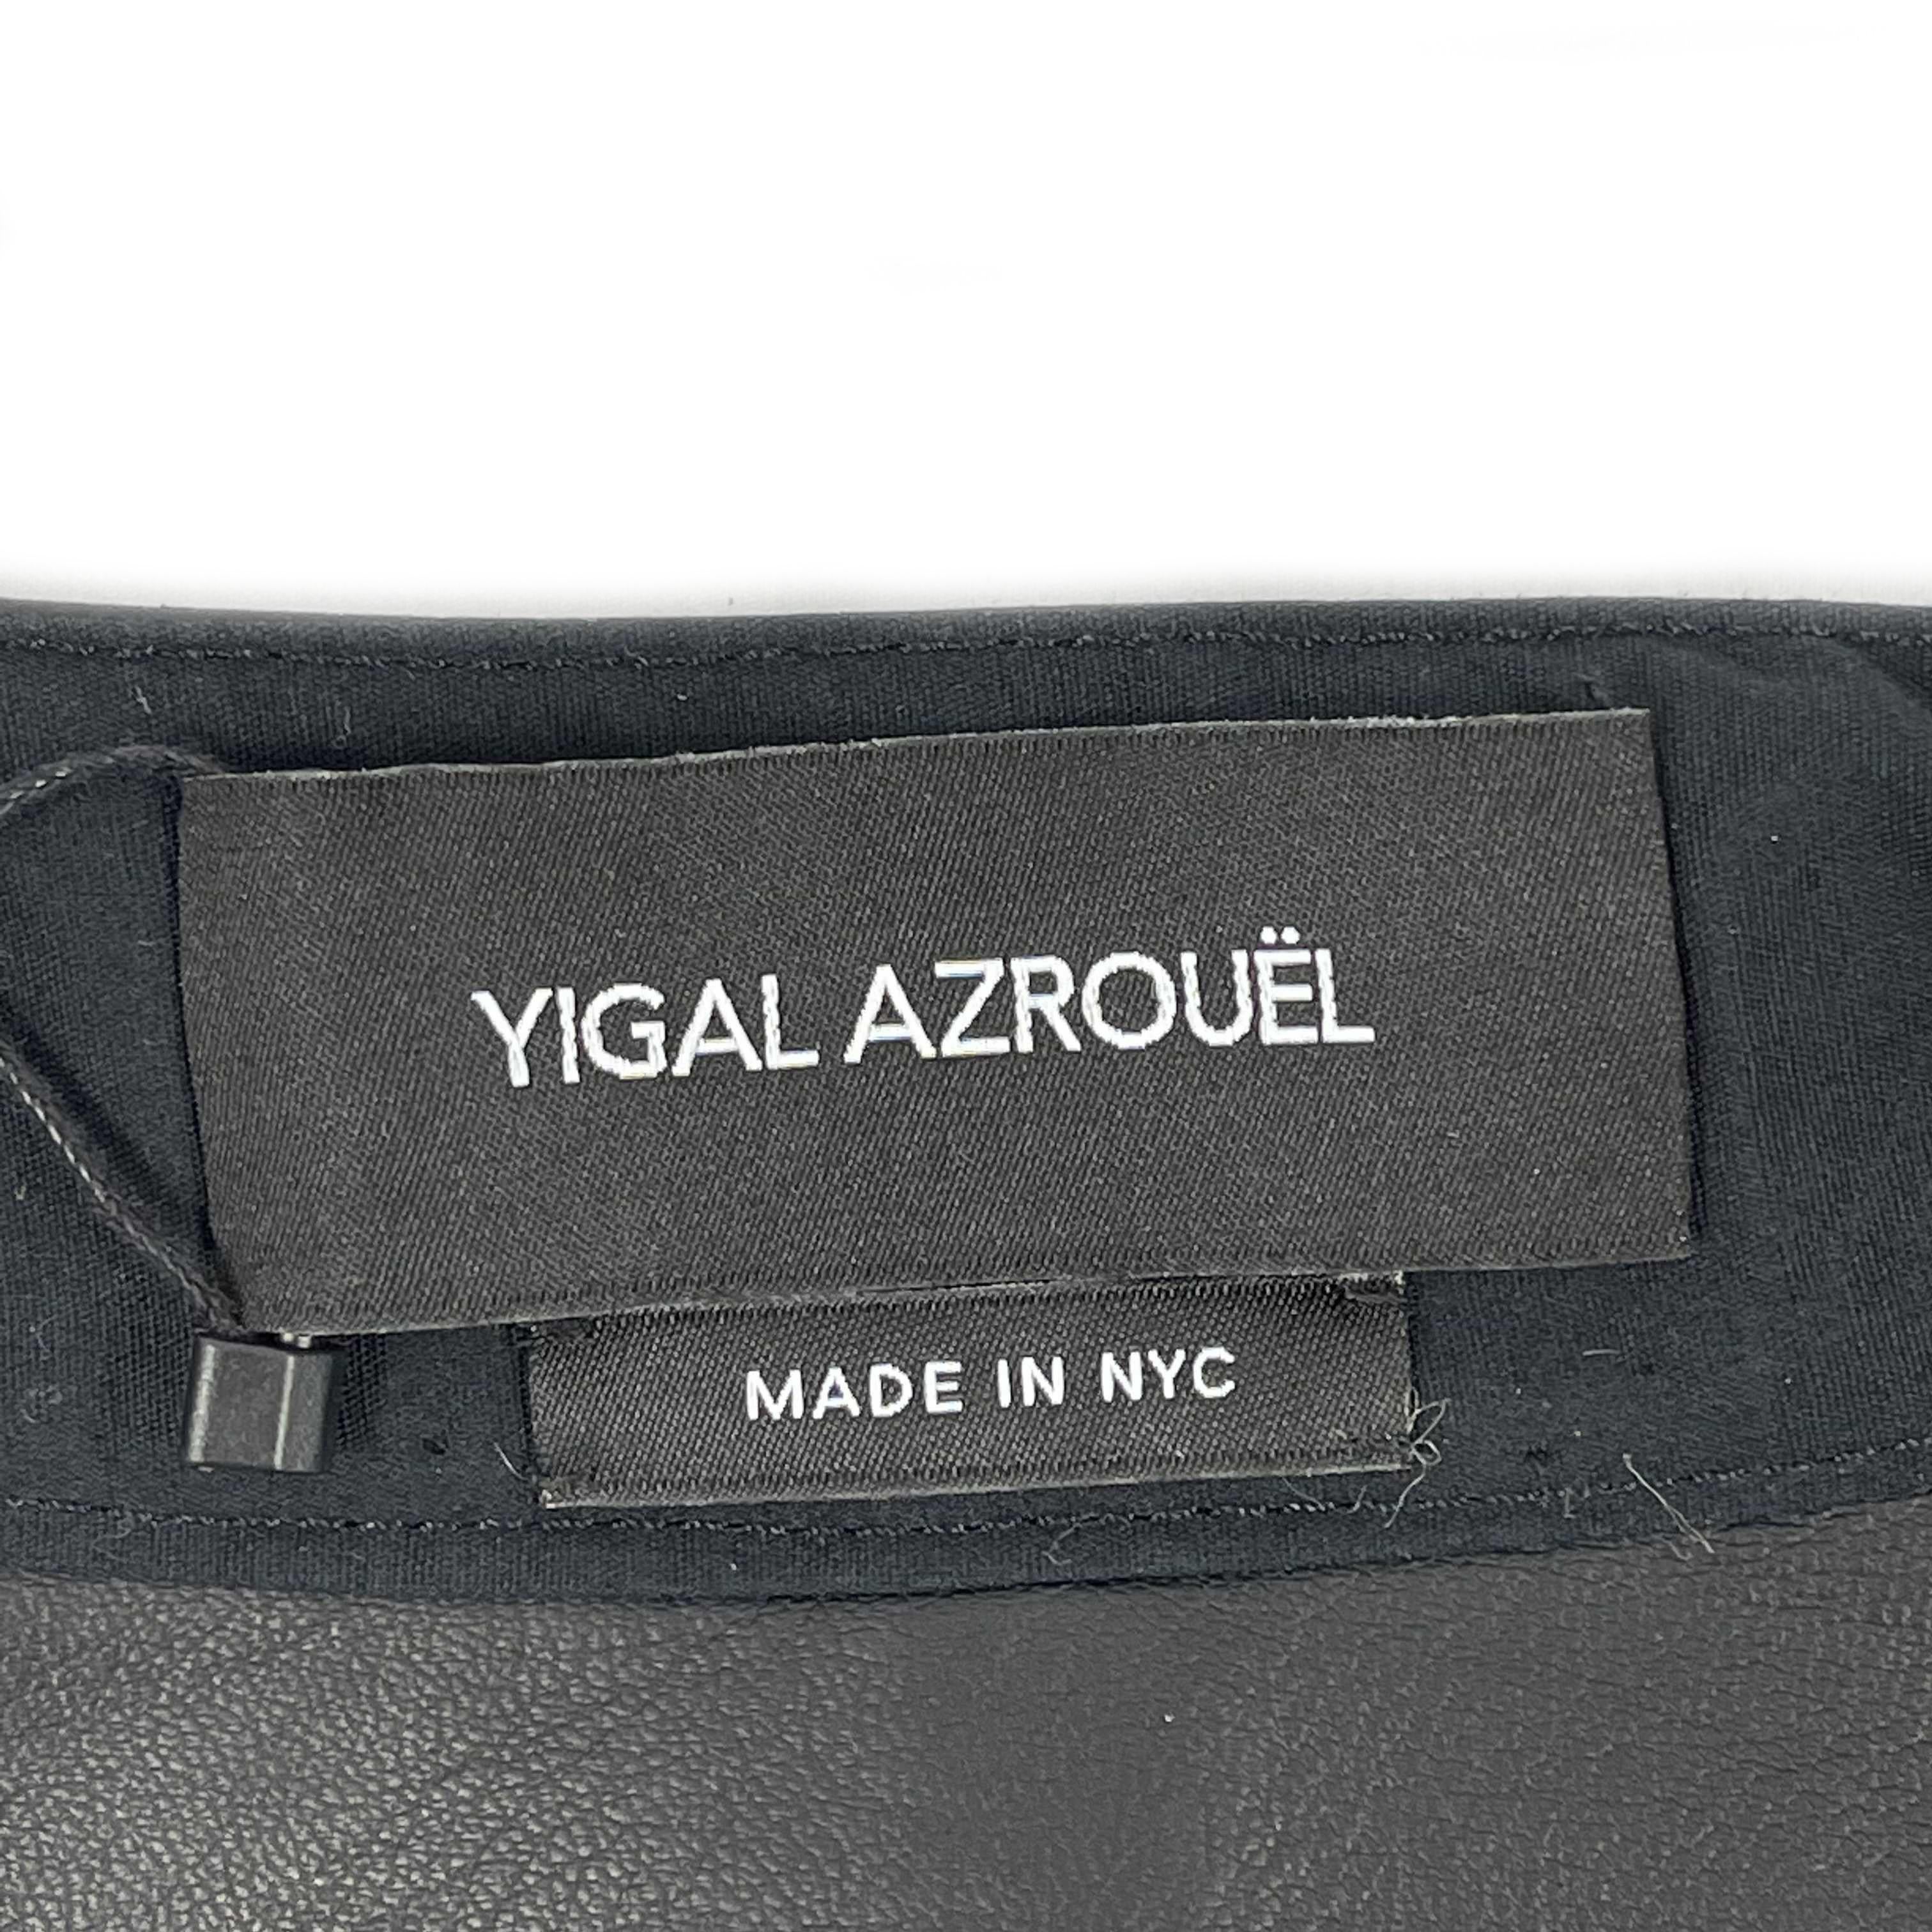 Yigal Azrouël Sheer Embroidered Black Leather Moto Jacket 2 / XS 1